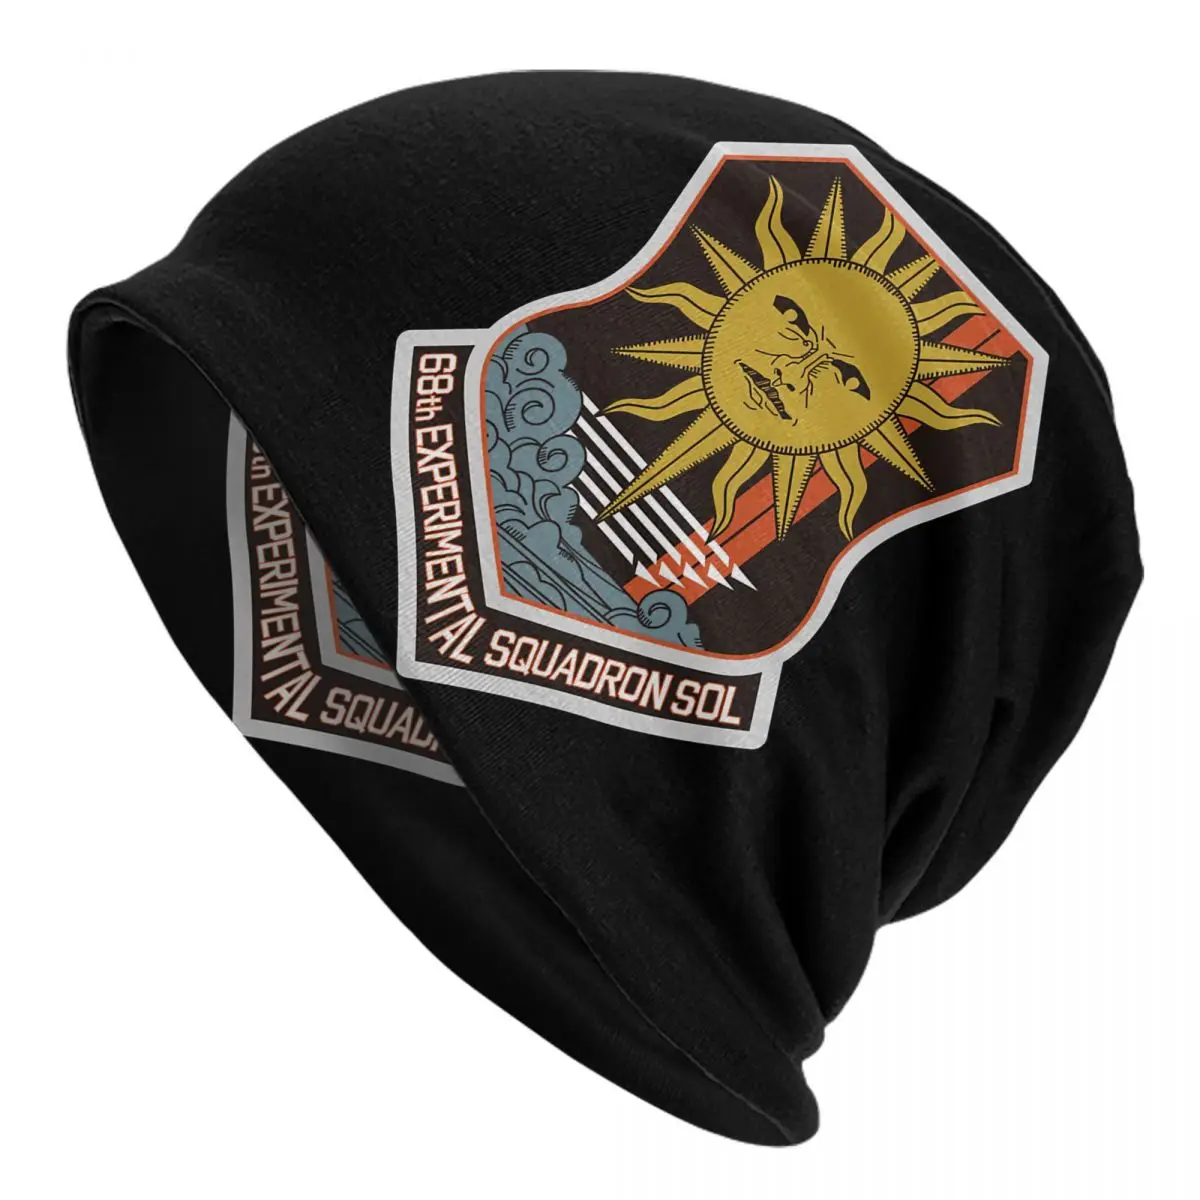 Ace Combat Sol Squadron Adult Men's Women's Knit Hat Keep warm winter knitted hat